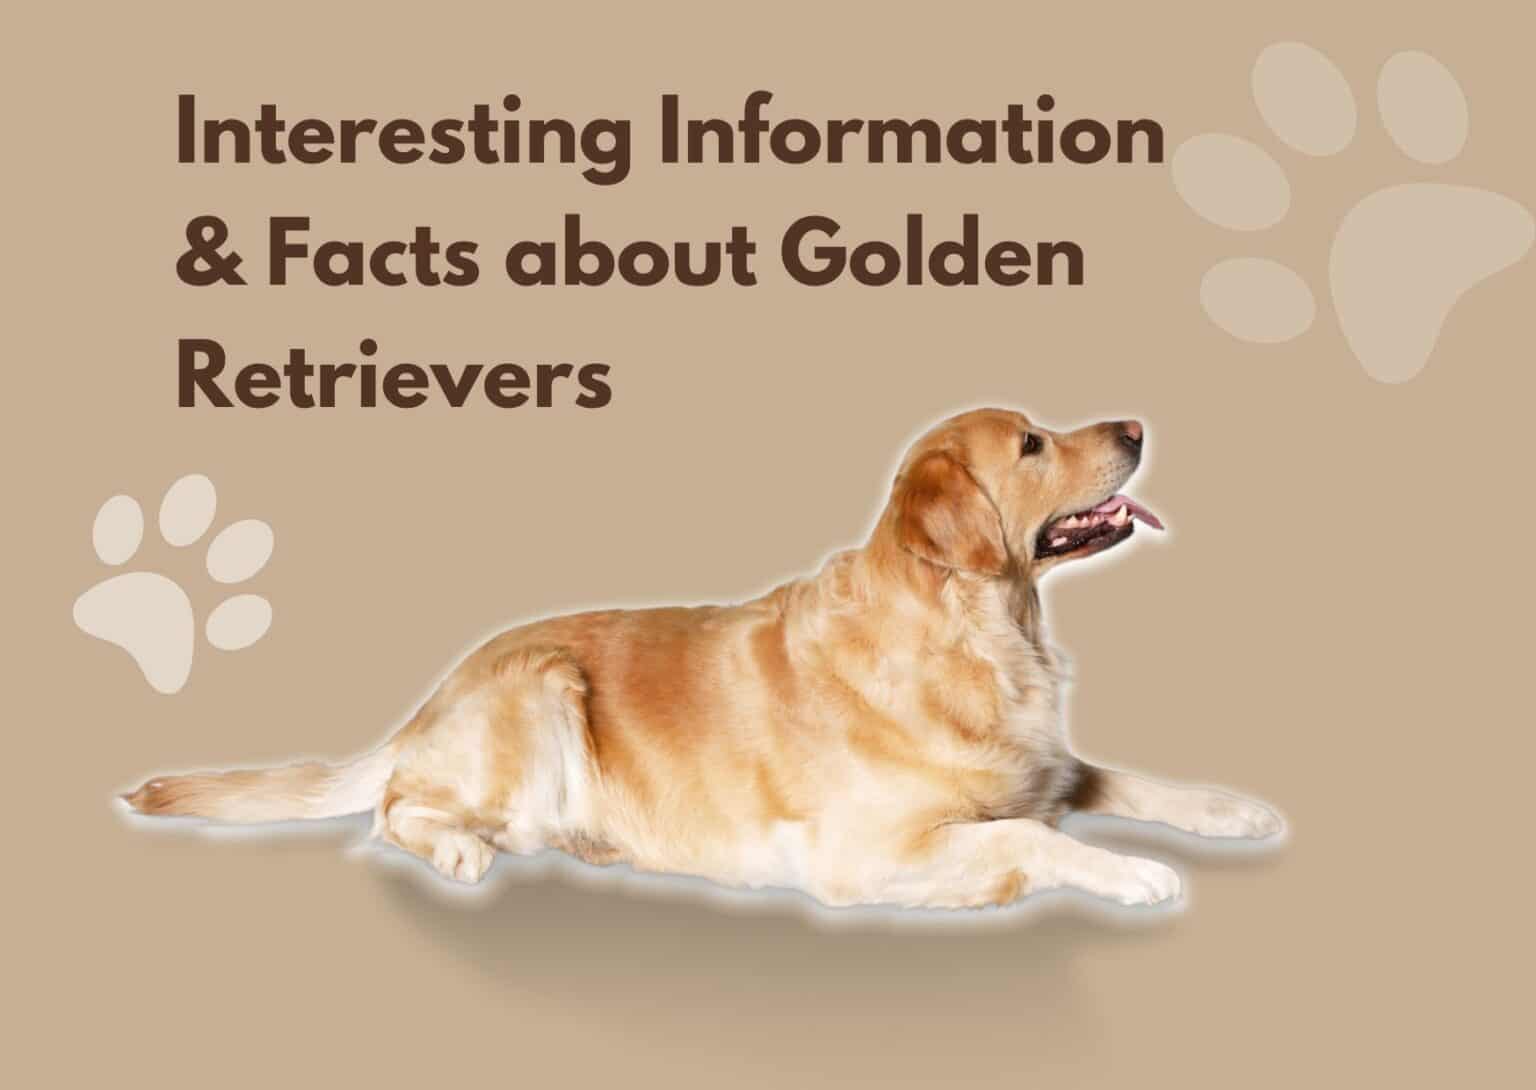 Interesting Information & Facts about Golden Retrievers